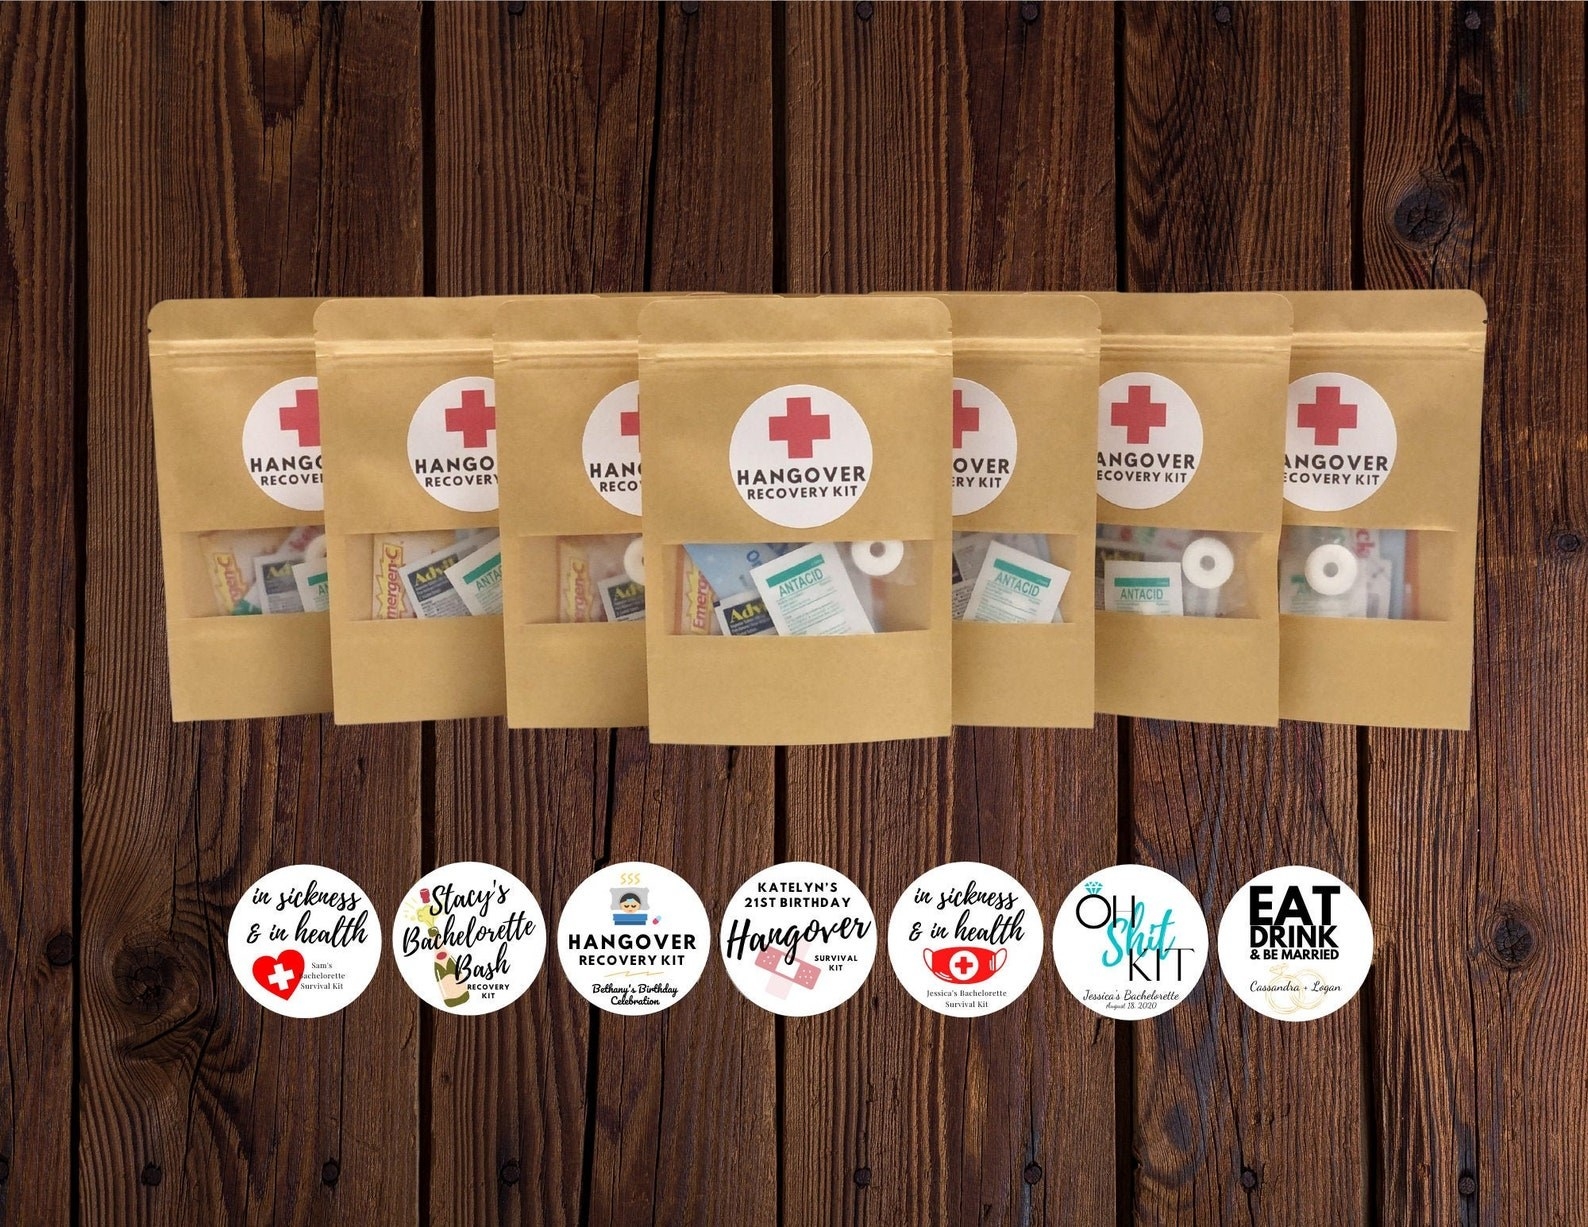 Seven of the hangover recovery kits and seven sticker options